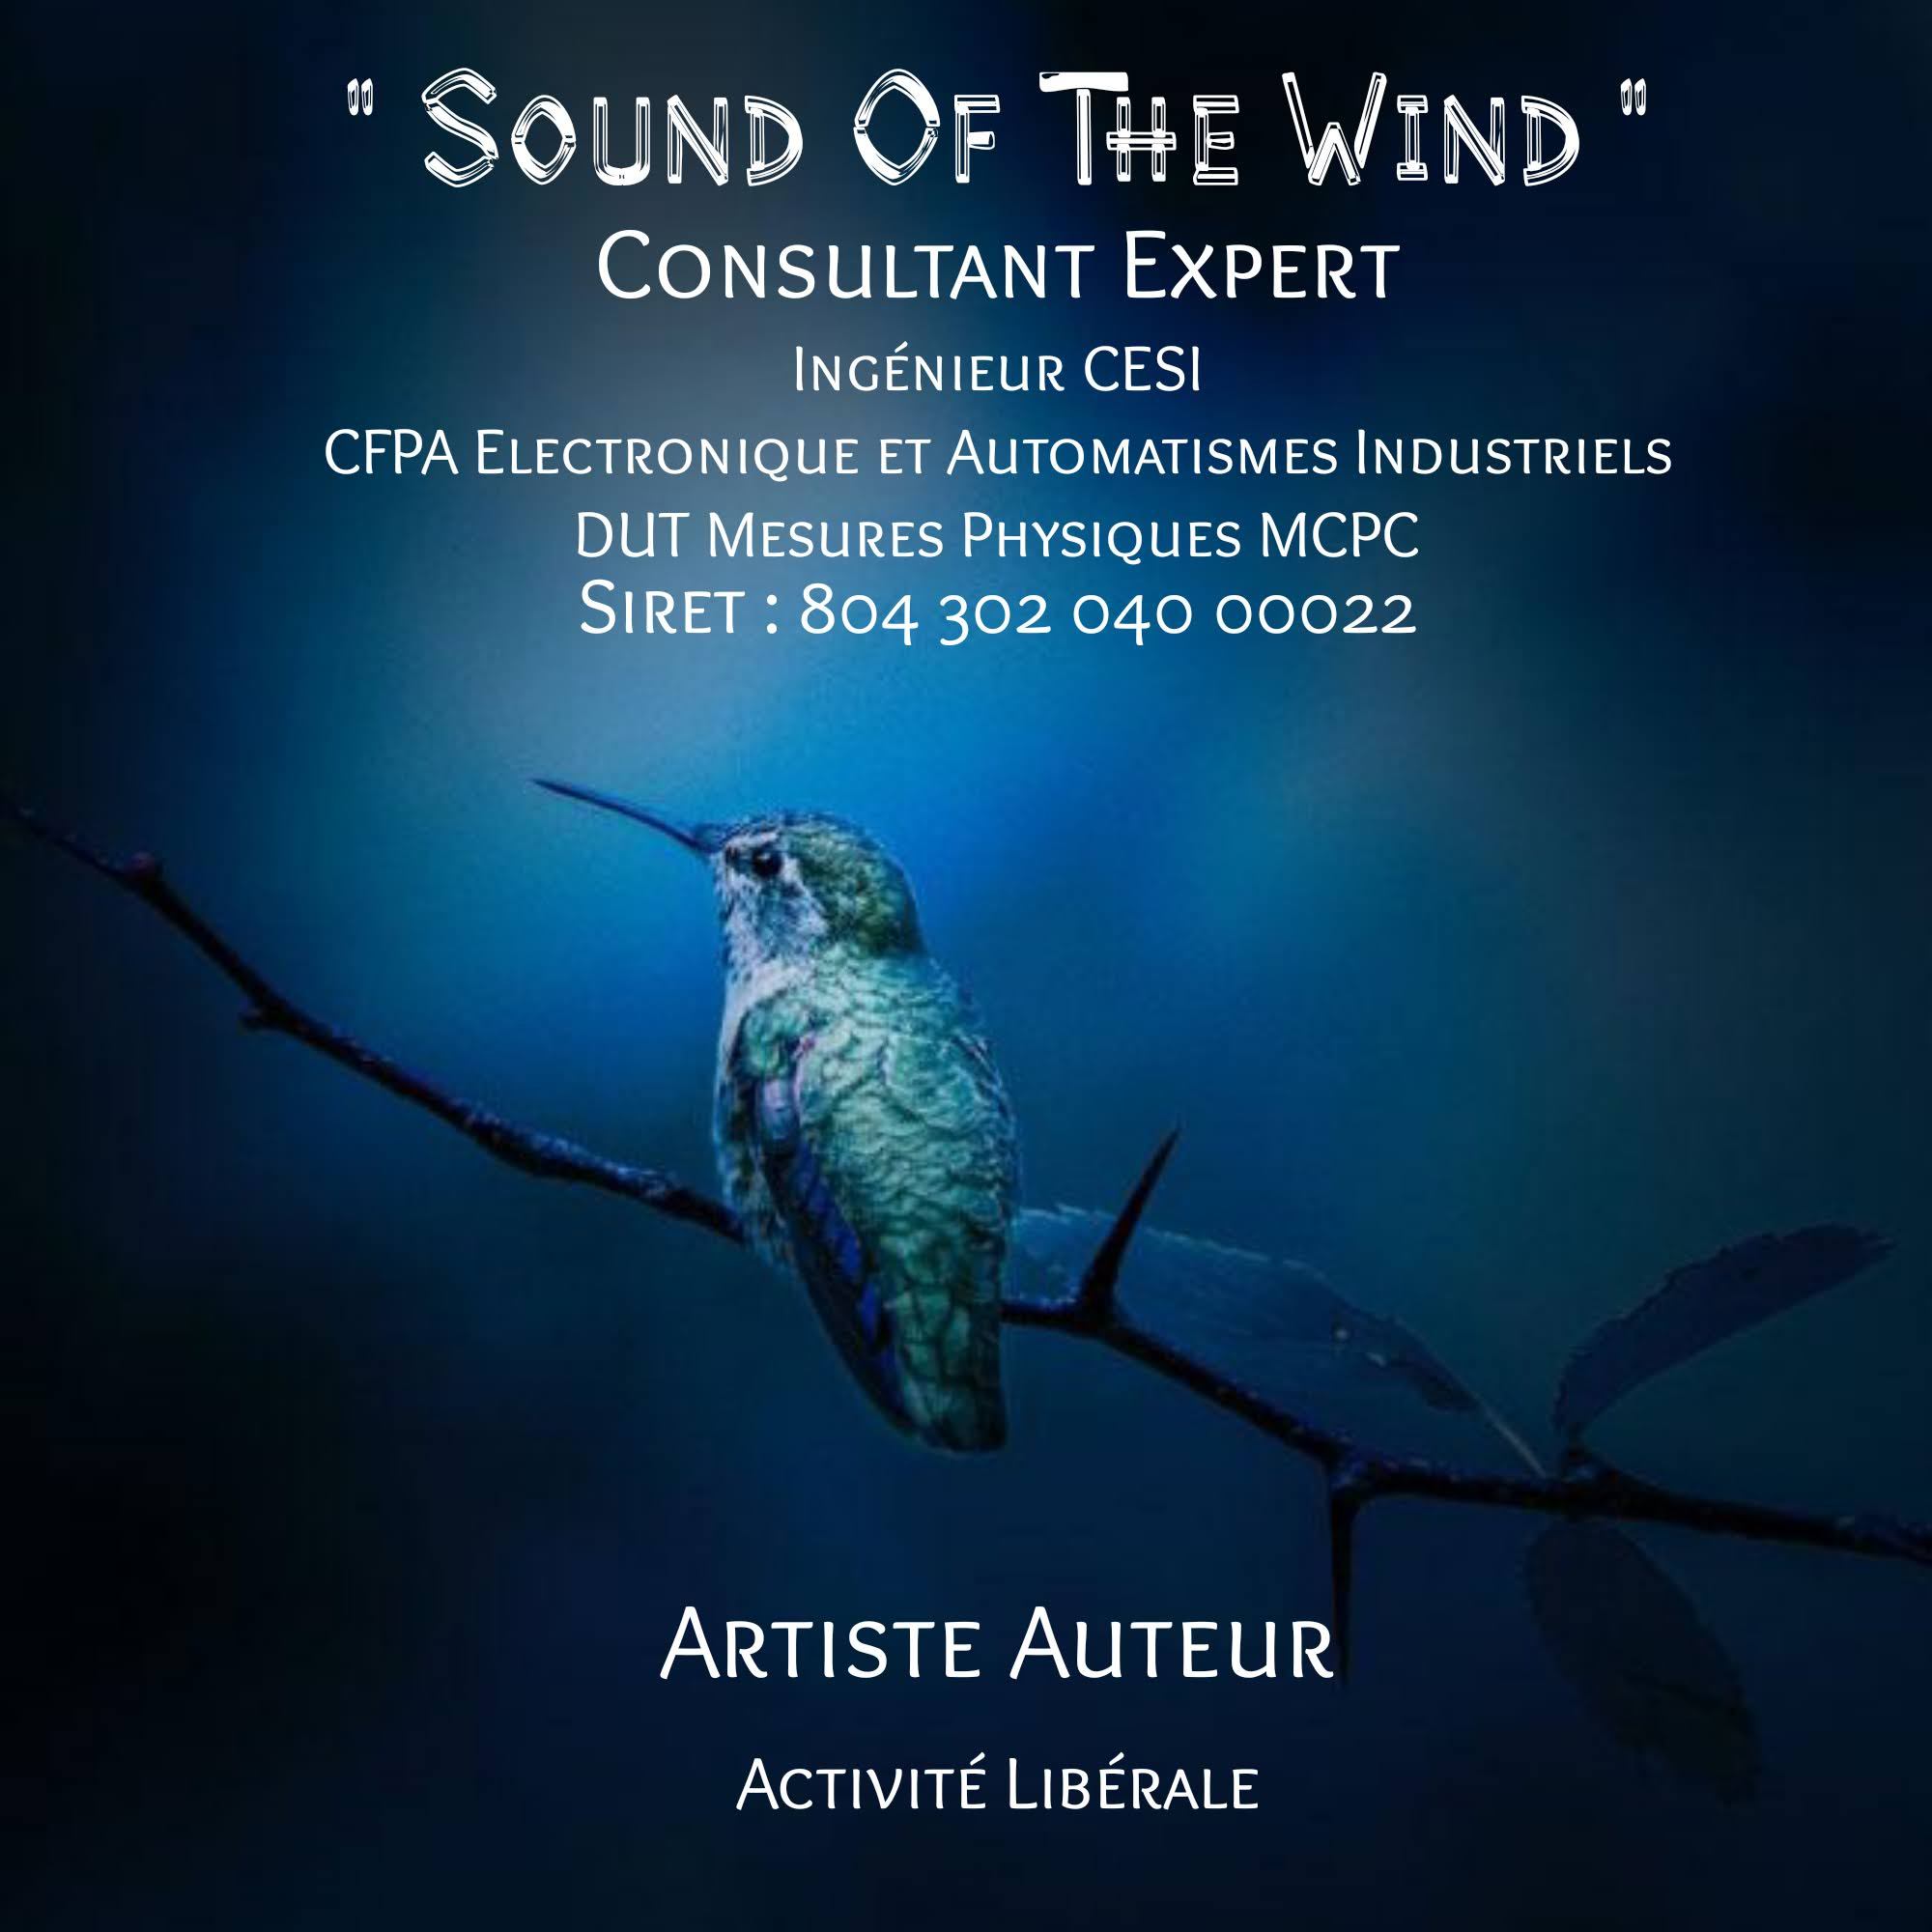 Label "Sound Of The Wind"